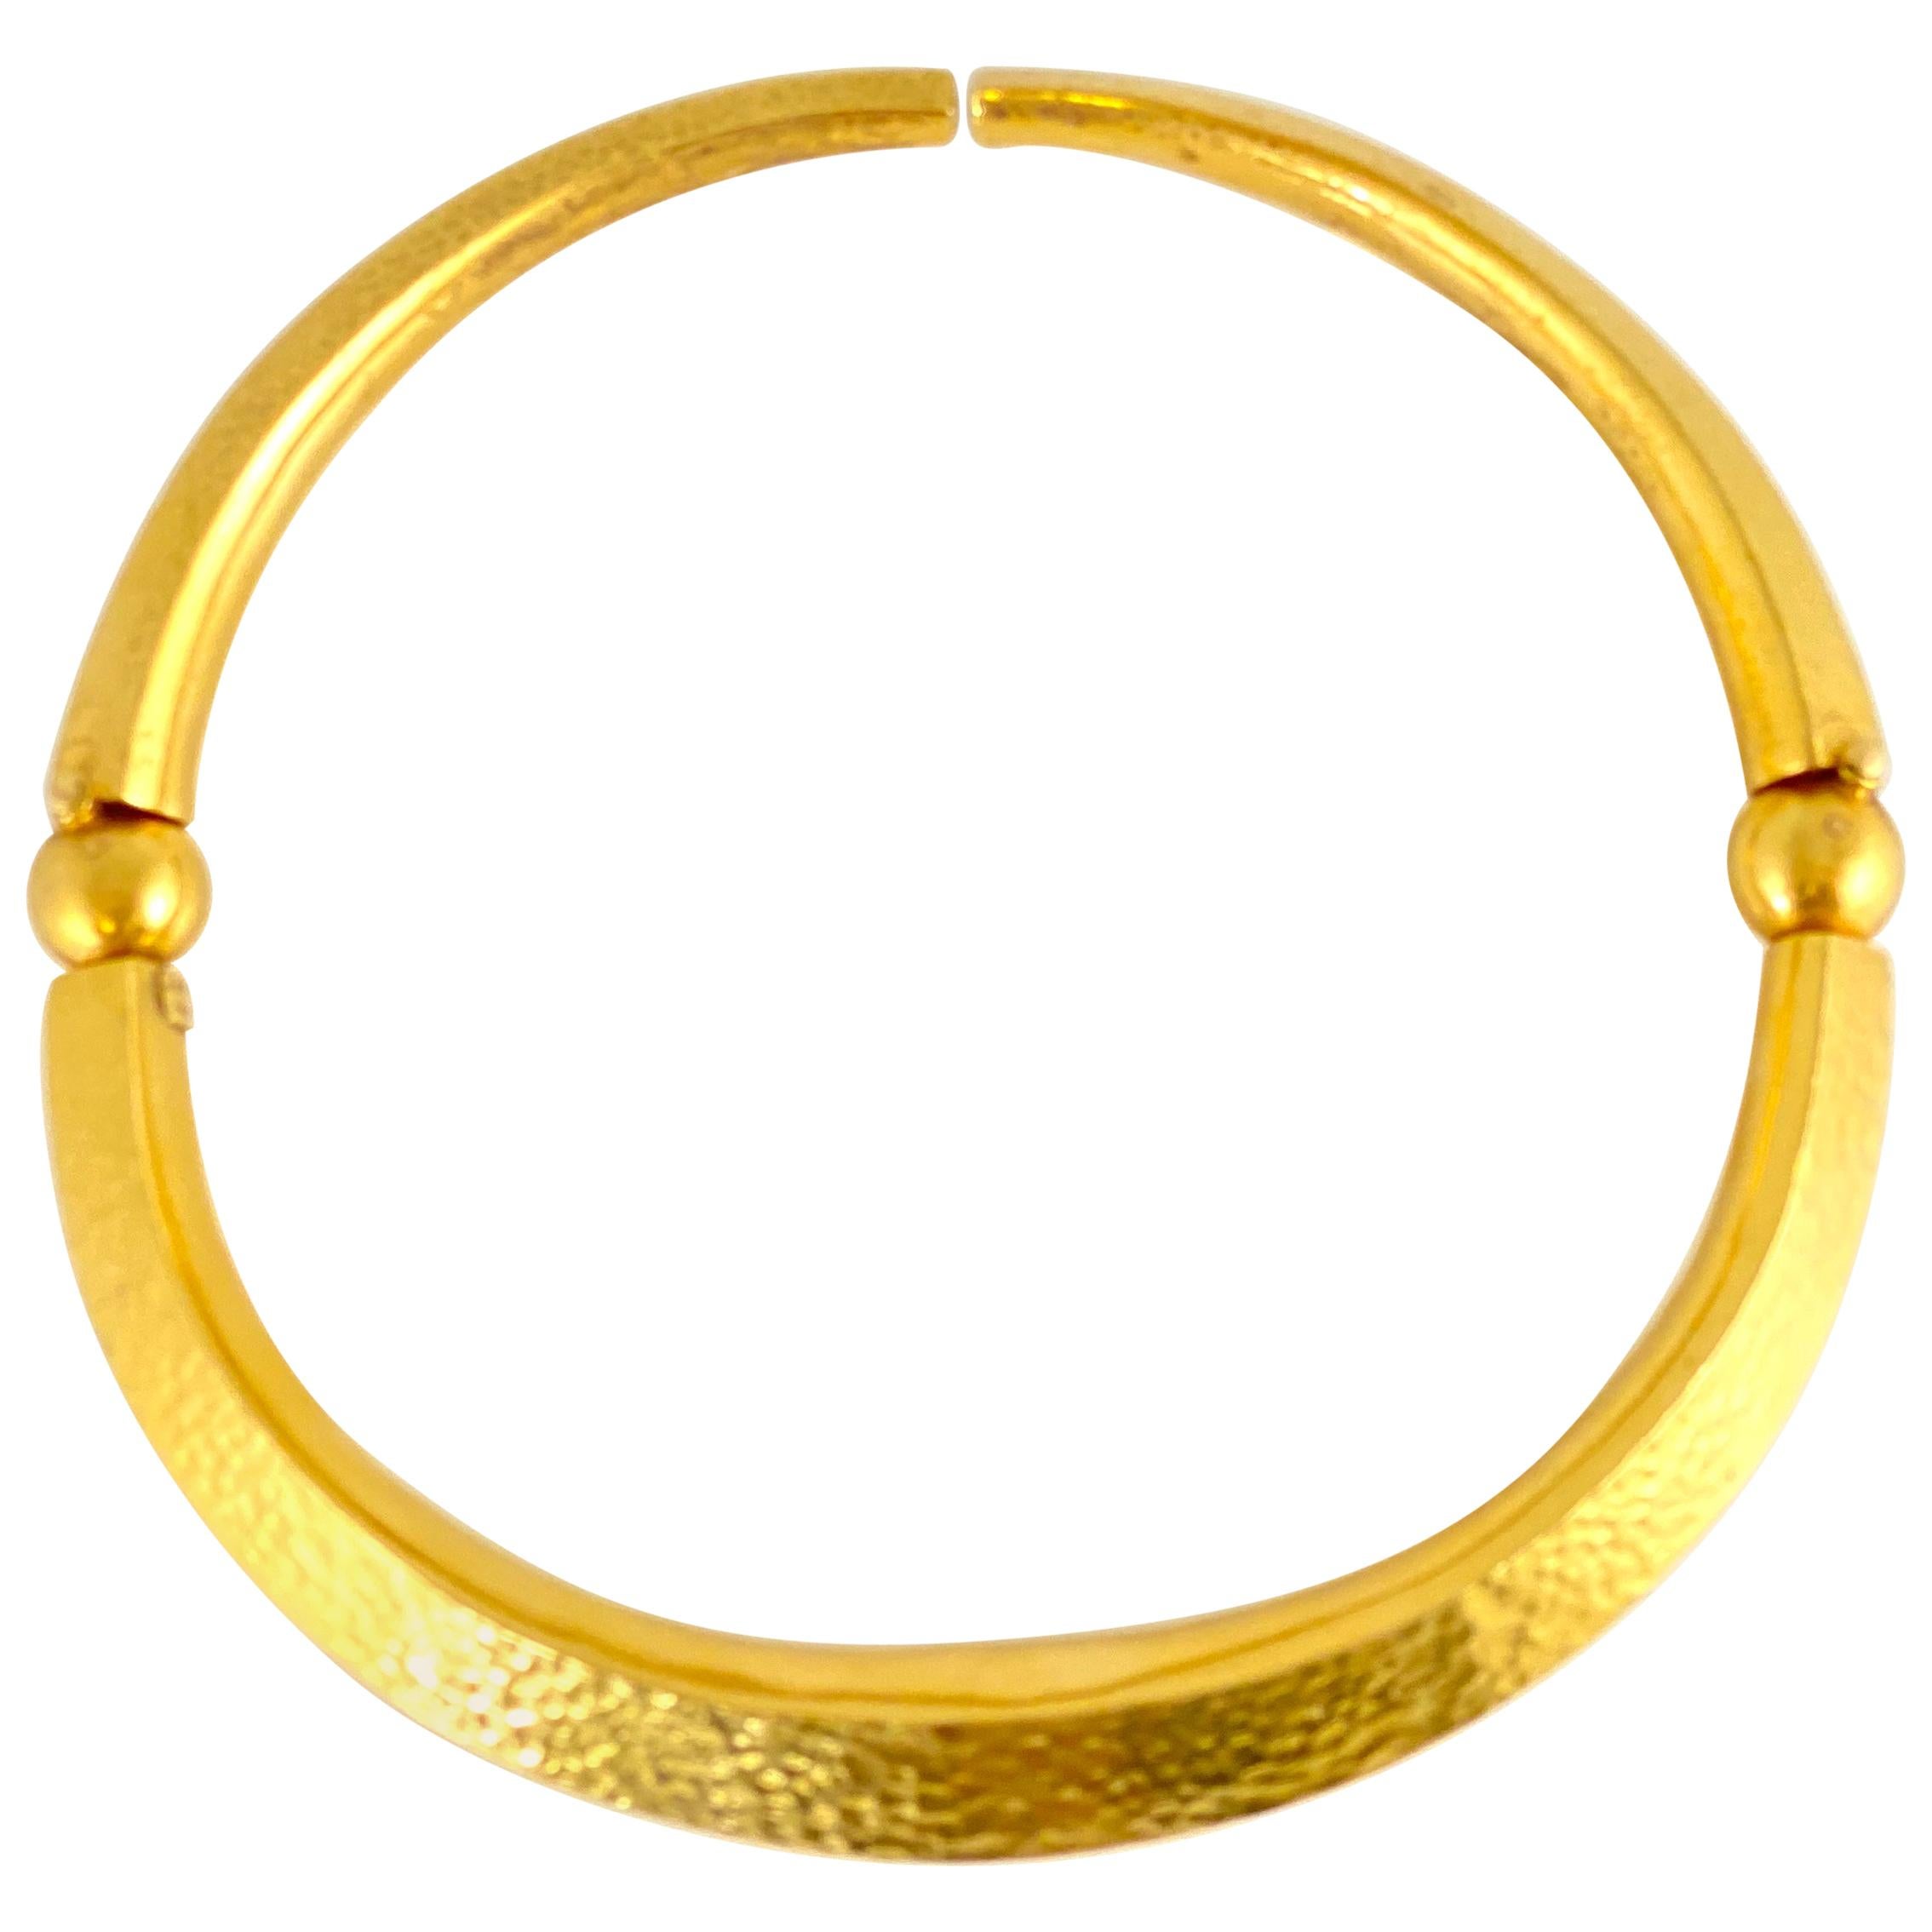 Ilias Lalaounis Greece Hammered Gold Choker Necklace